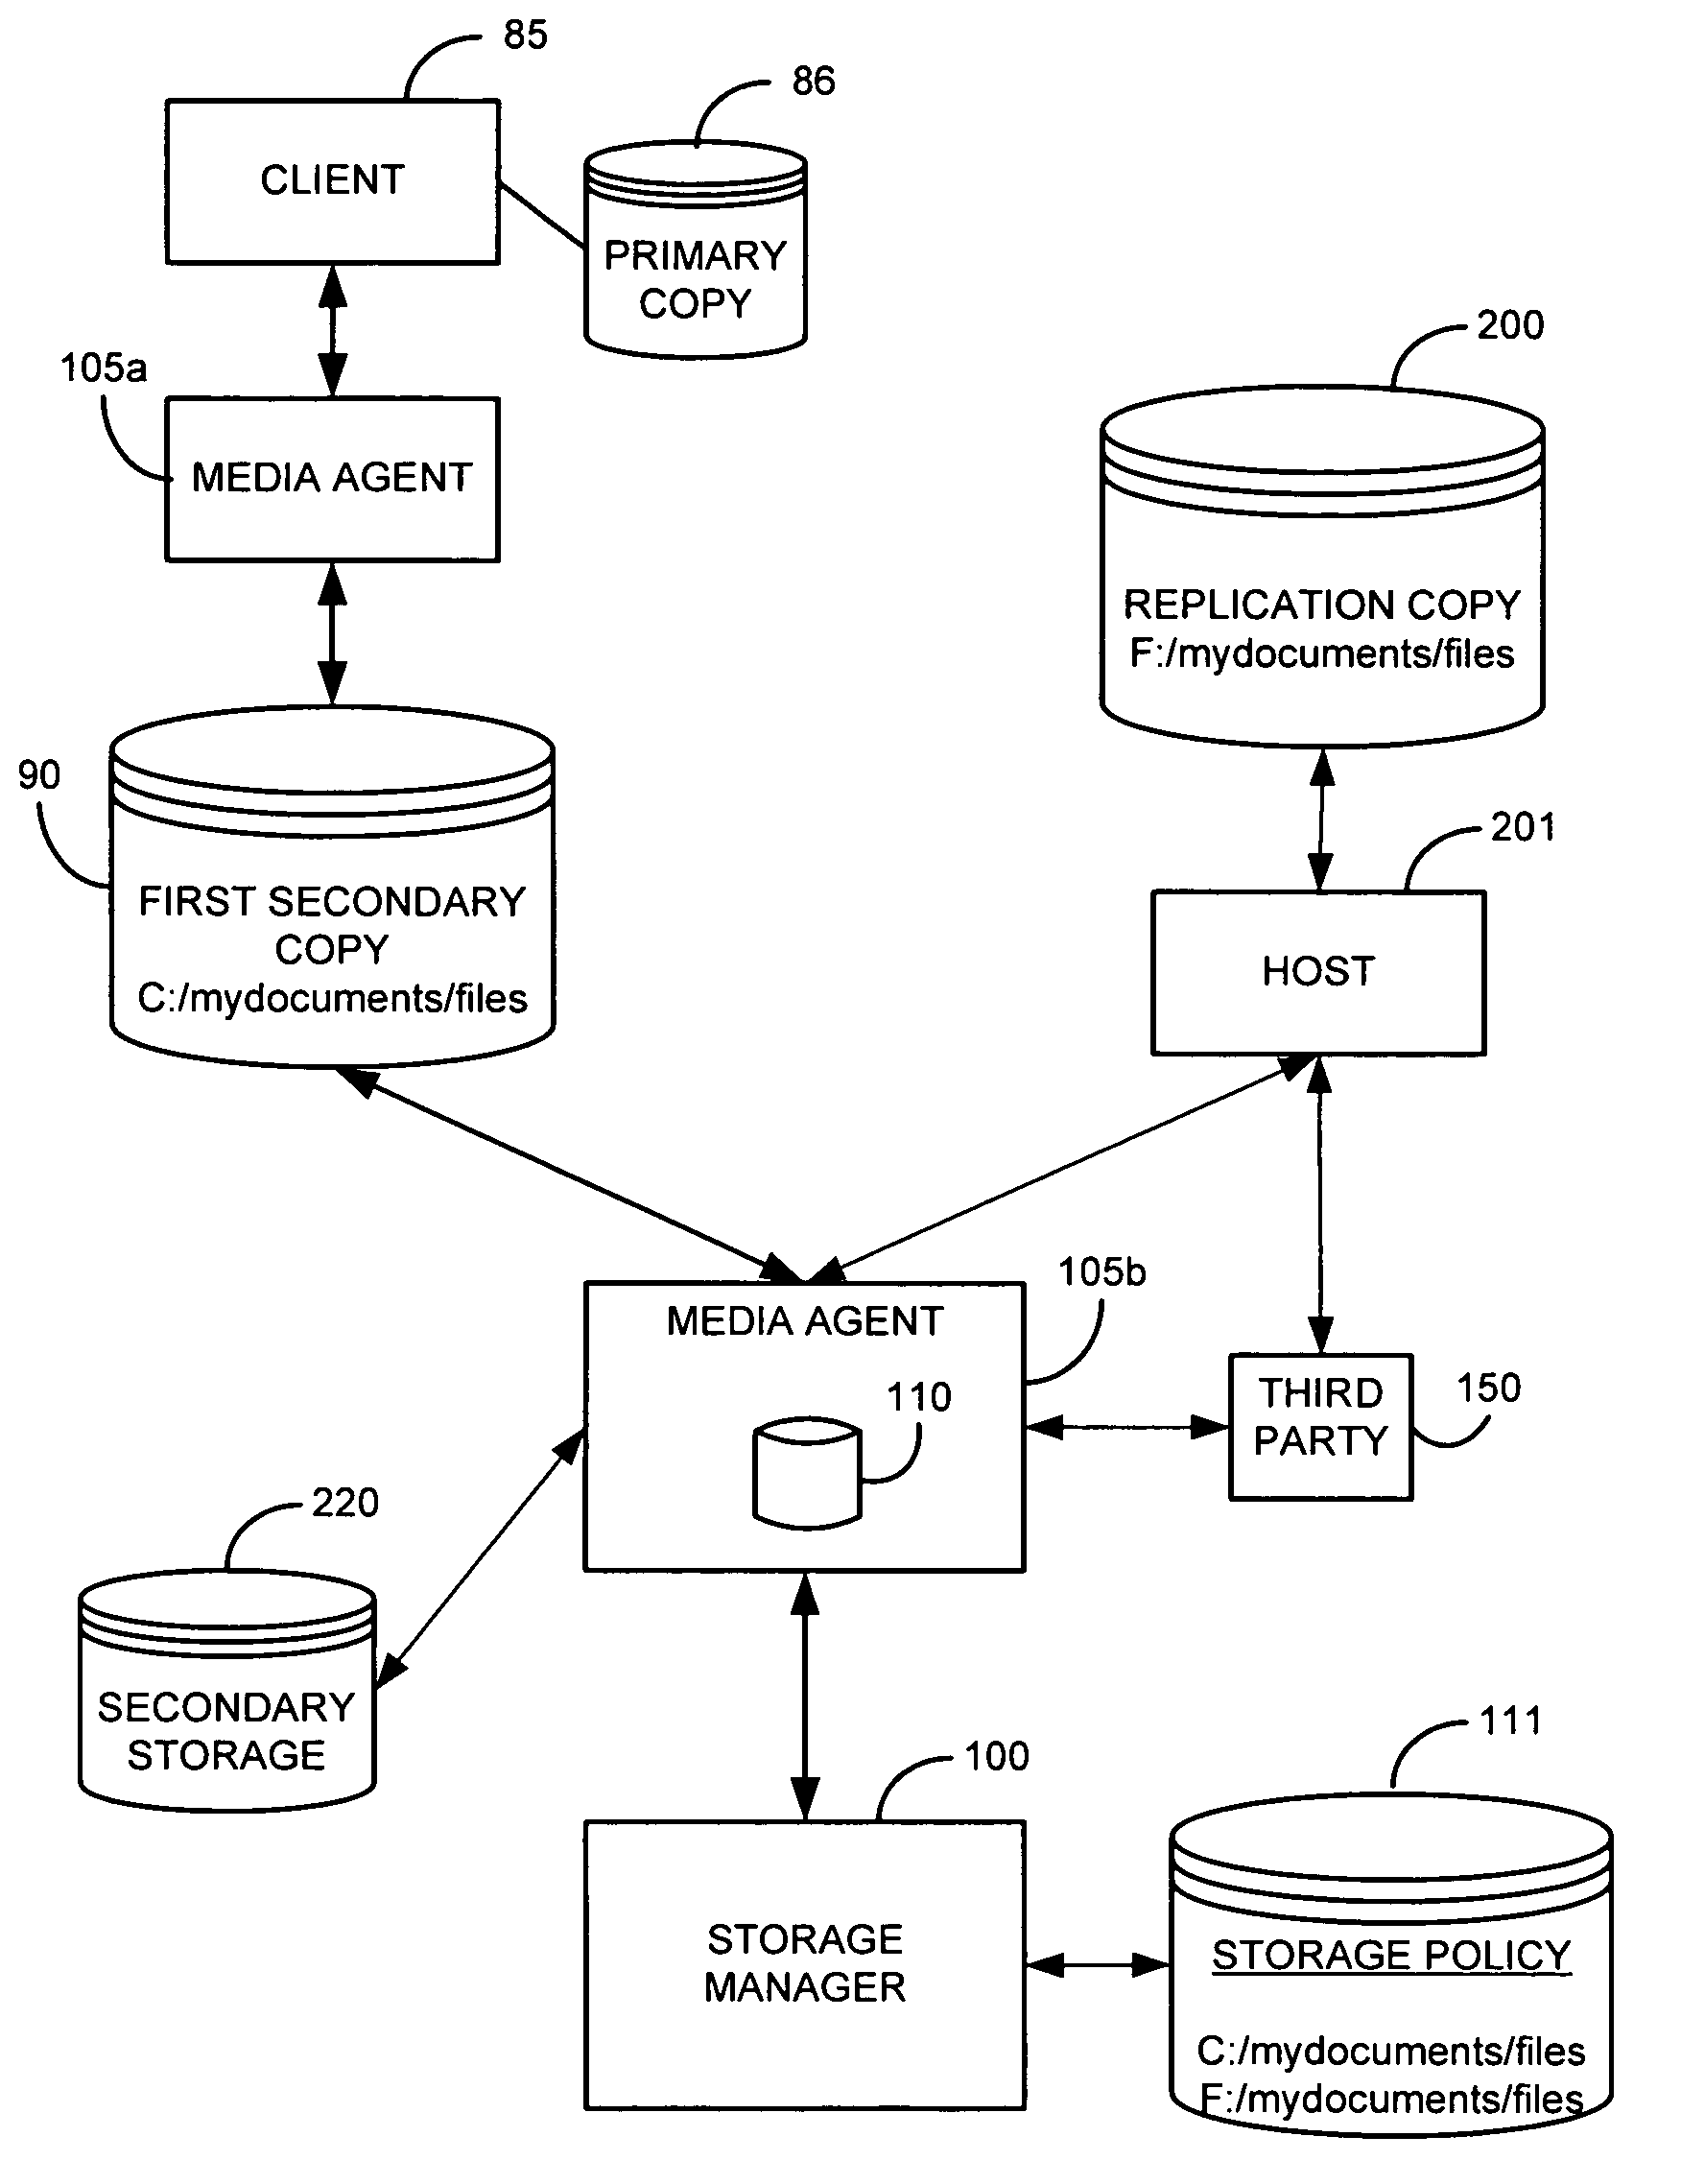 System and method for performing replication copy storage operations